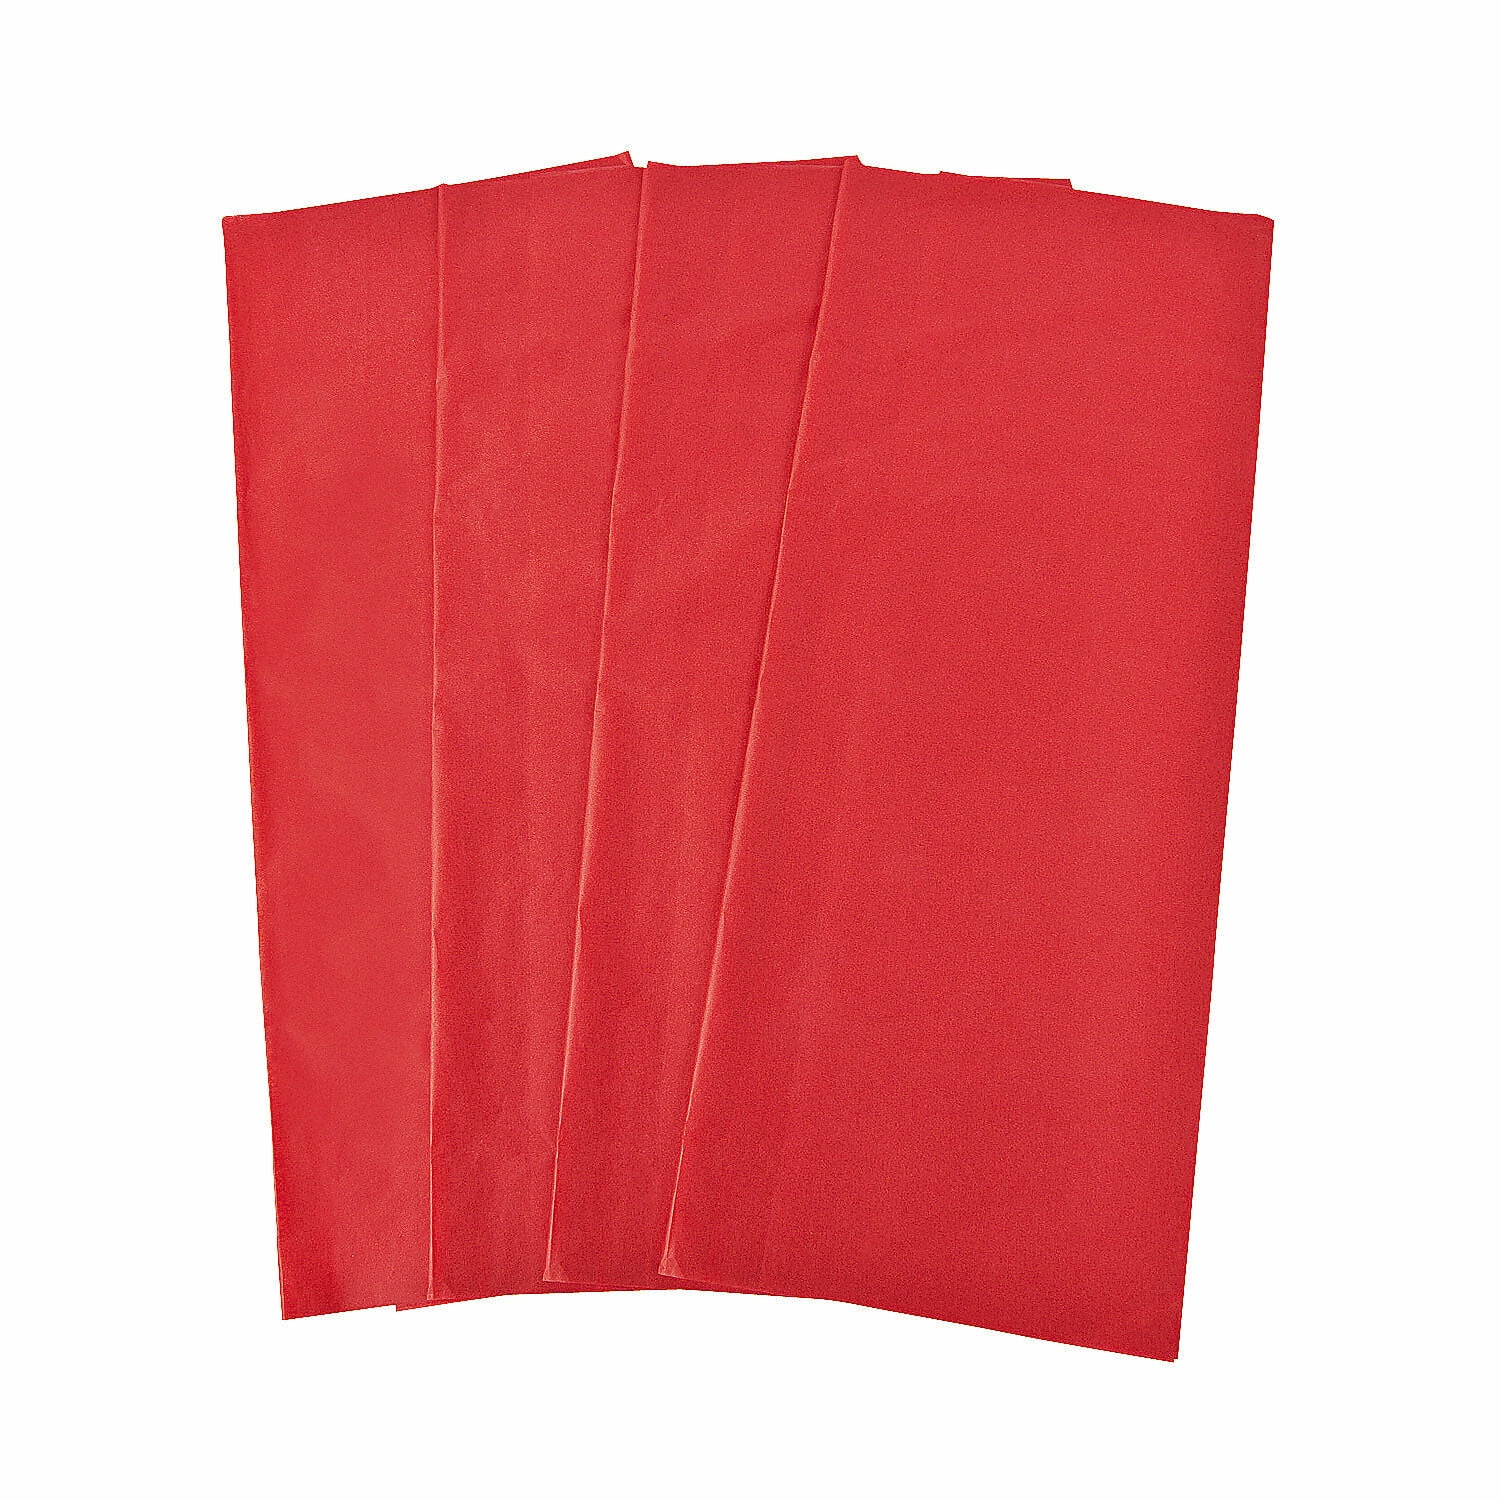 Red Waxed Tissue Paper, 20 x 30 per sheet-TWX-RD